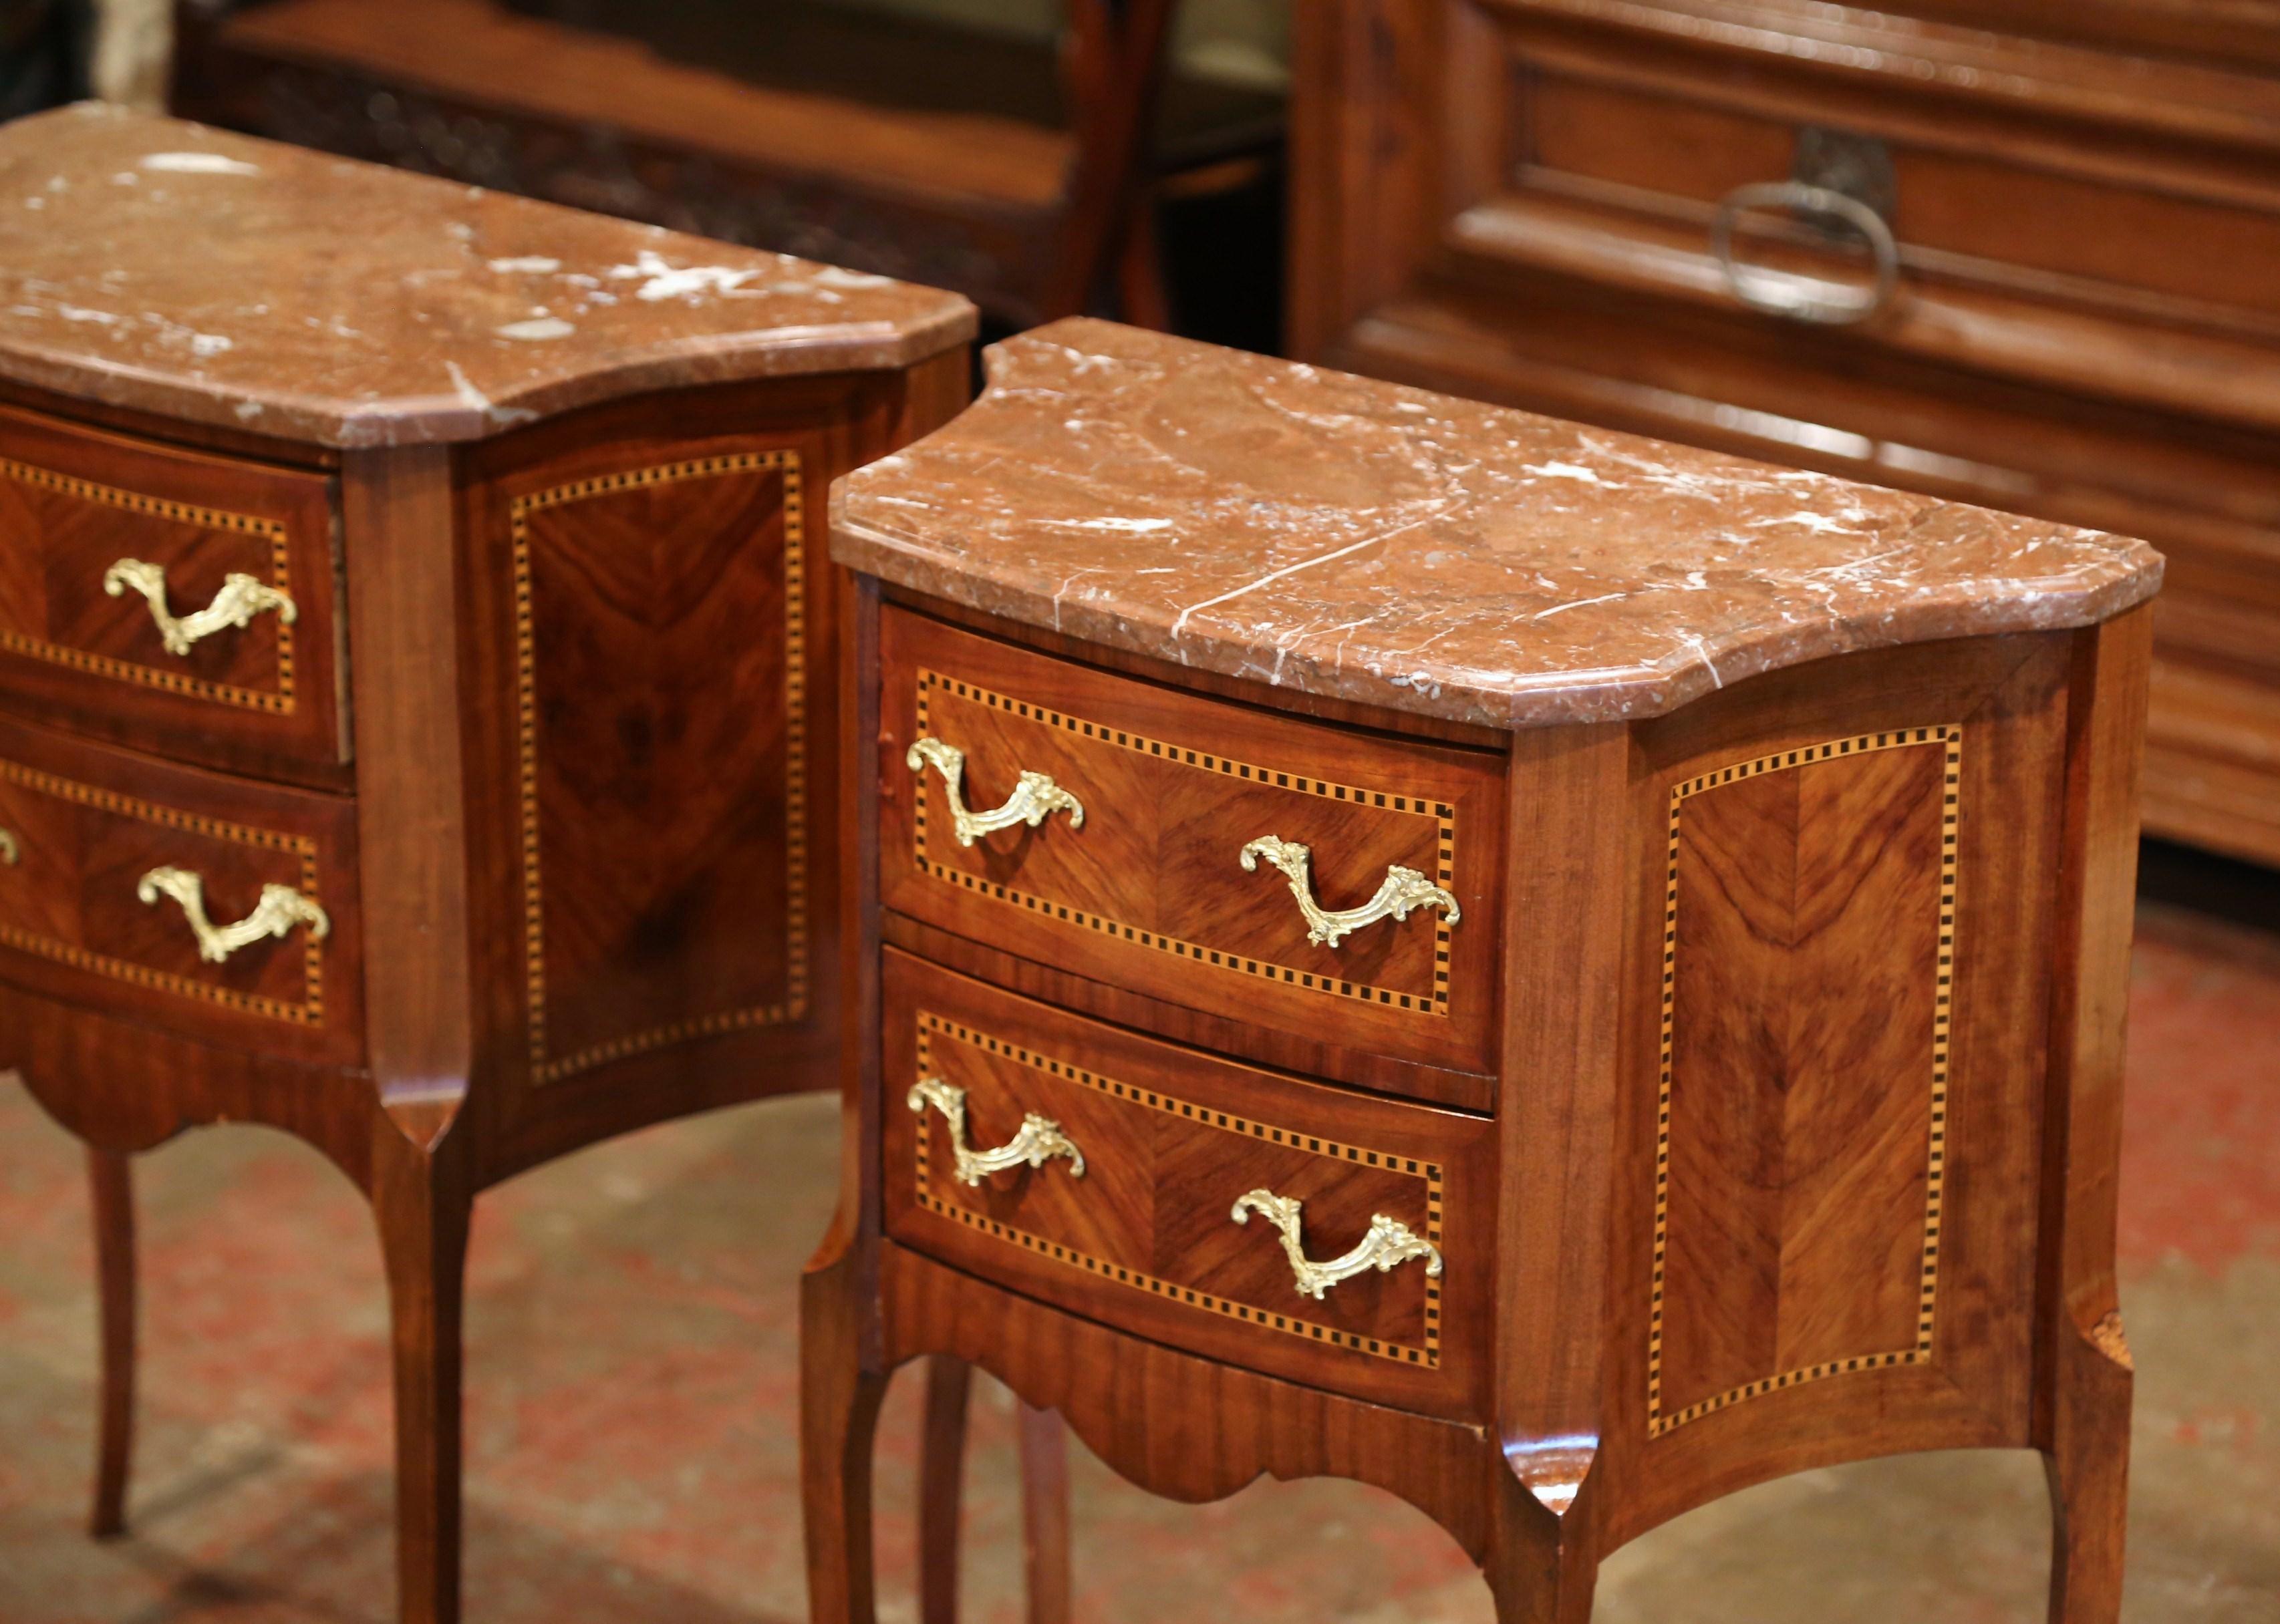 Crafted in France, circa 1920, the antique nightstands sit on cabriole leg embellished with front bronze caps over the feet. Each cabinet has curved sides, and two drawers across the front decorated with inlay marquetry work and bronze handles over